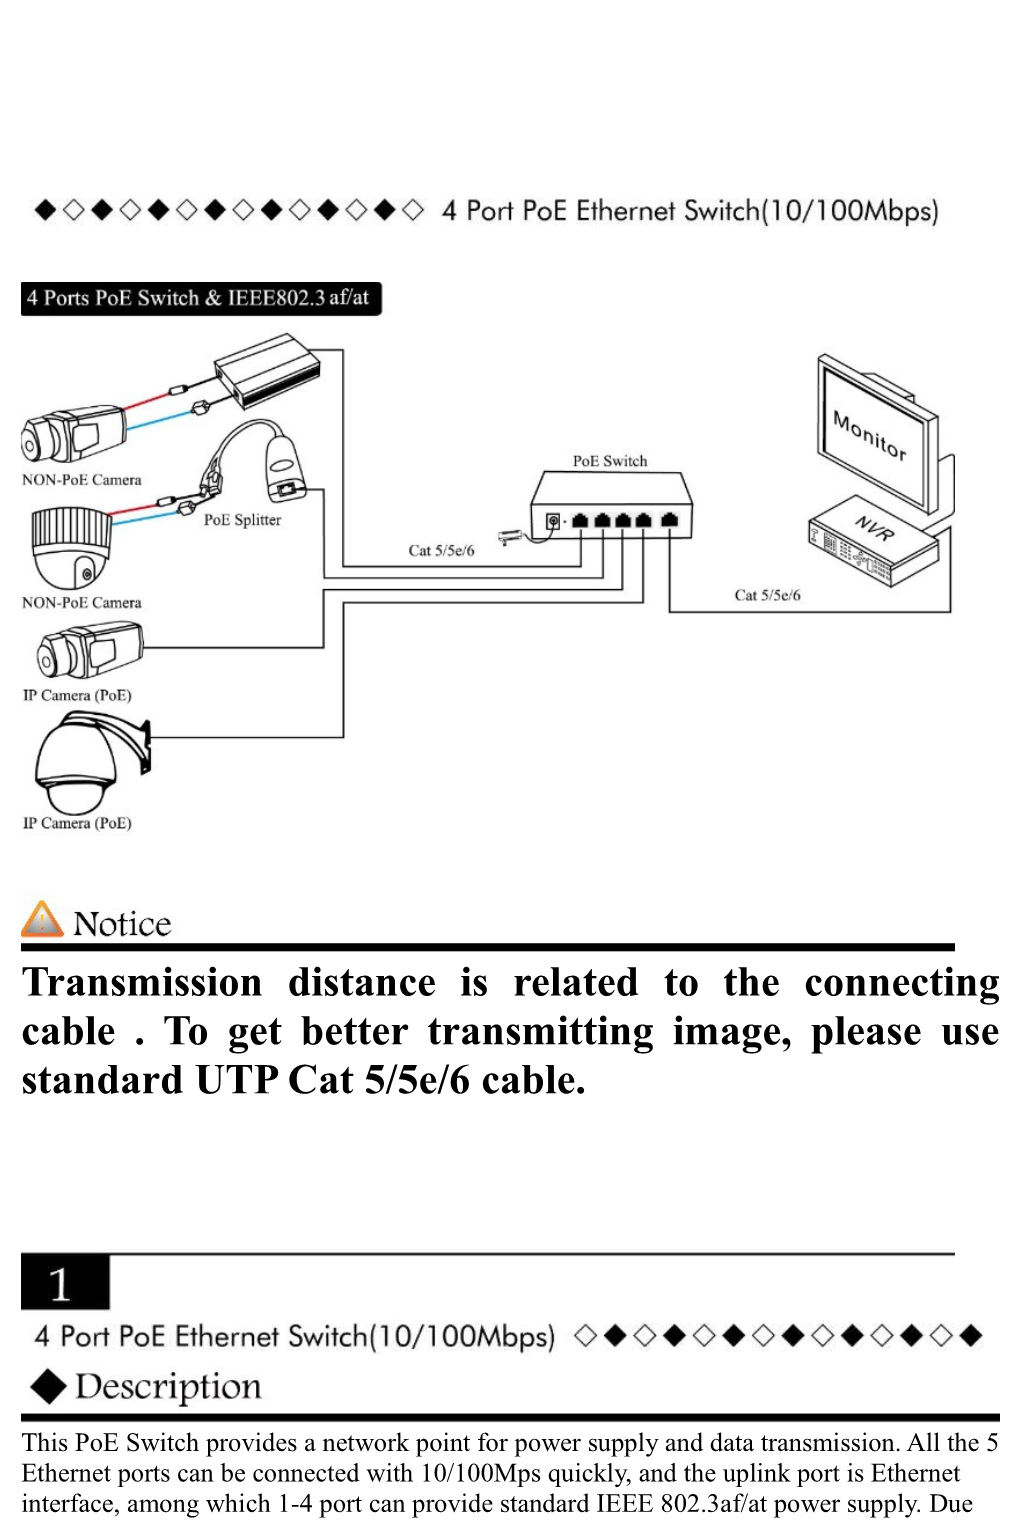 Transmission Distance Is Related to the Connecting Cable . to Get Better Transmitting